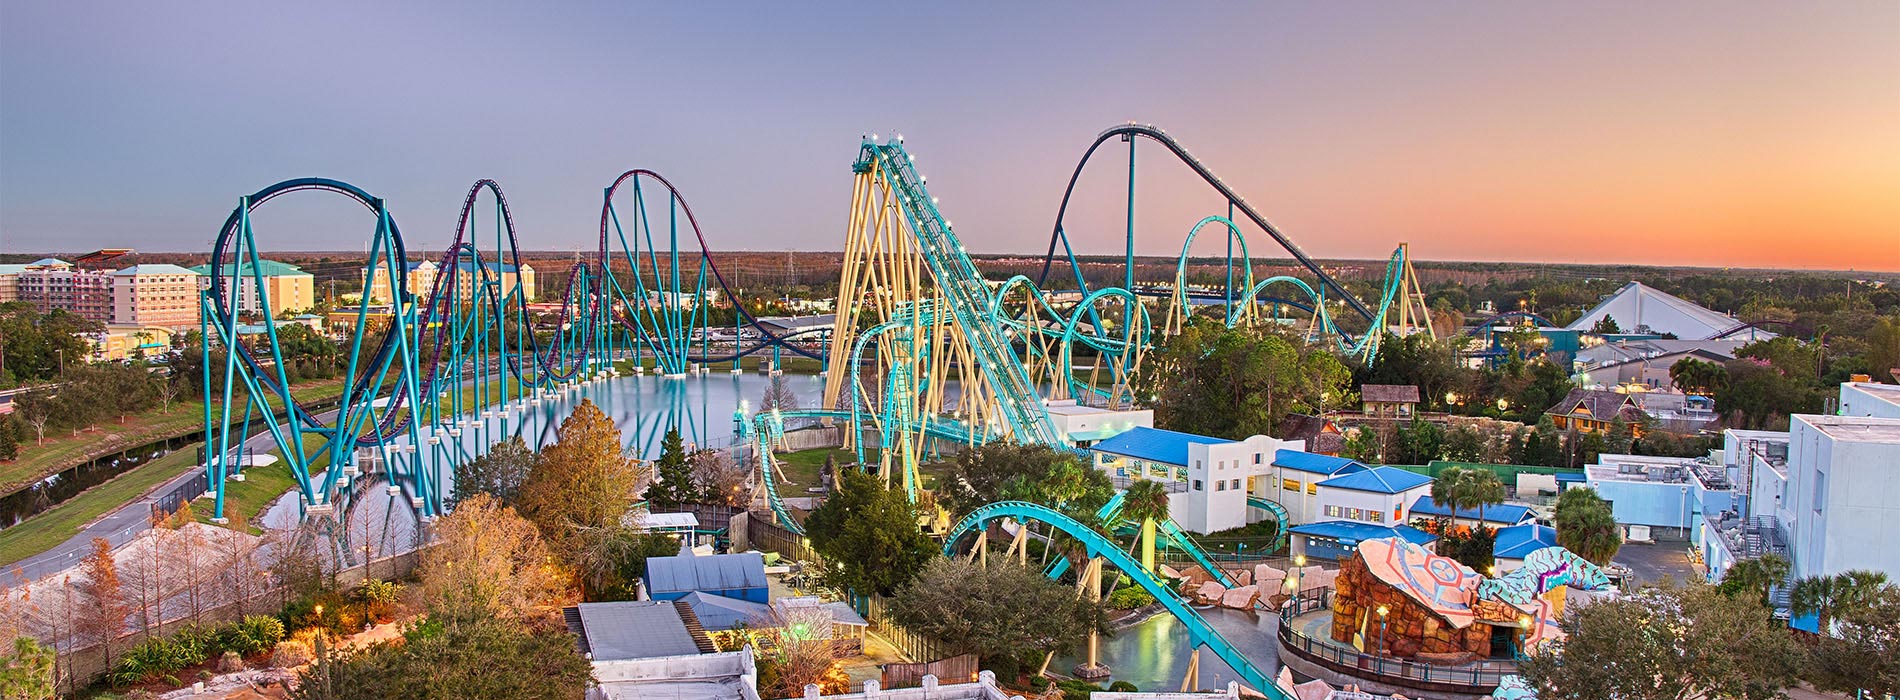 SeaWorld Orlando is home to some incredible coasters